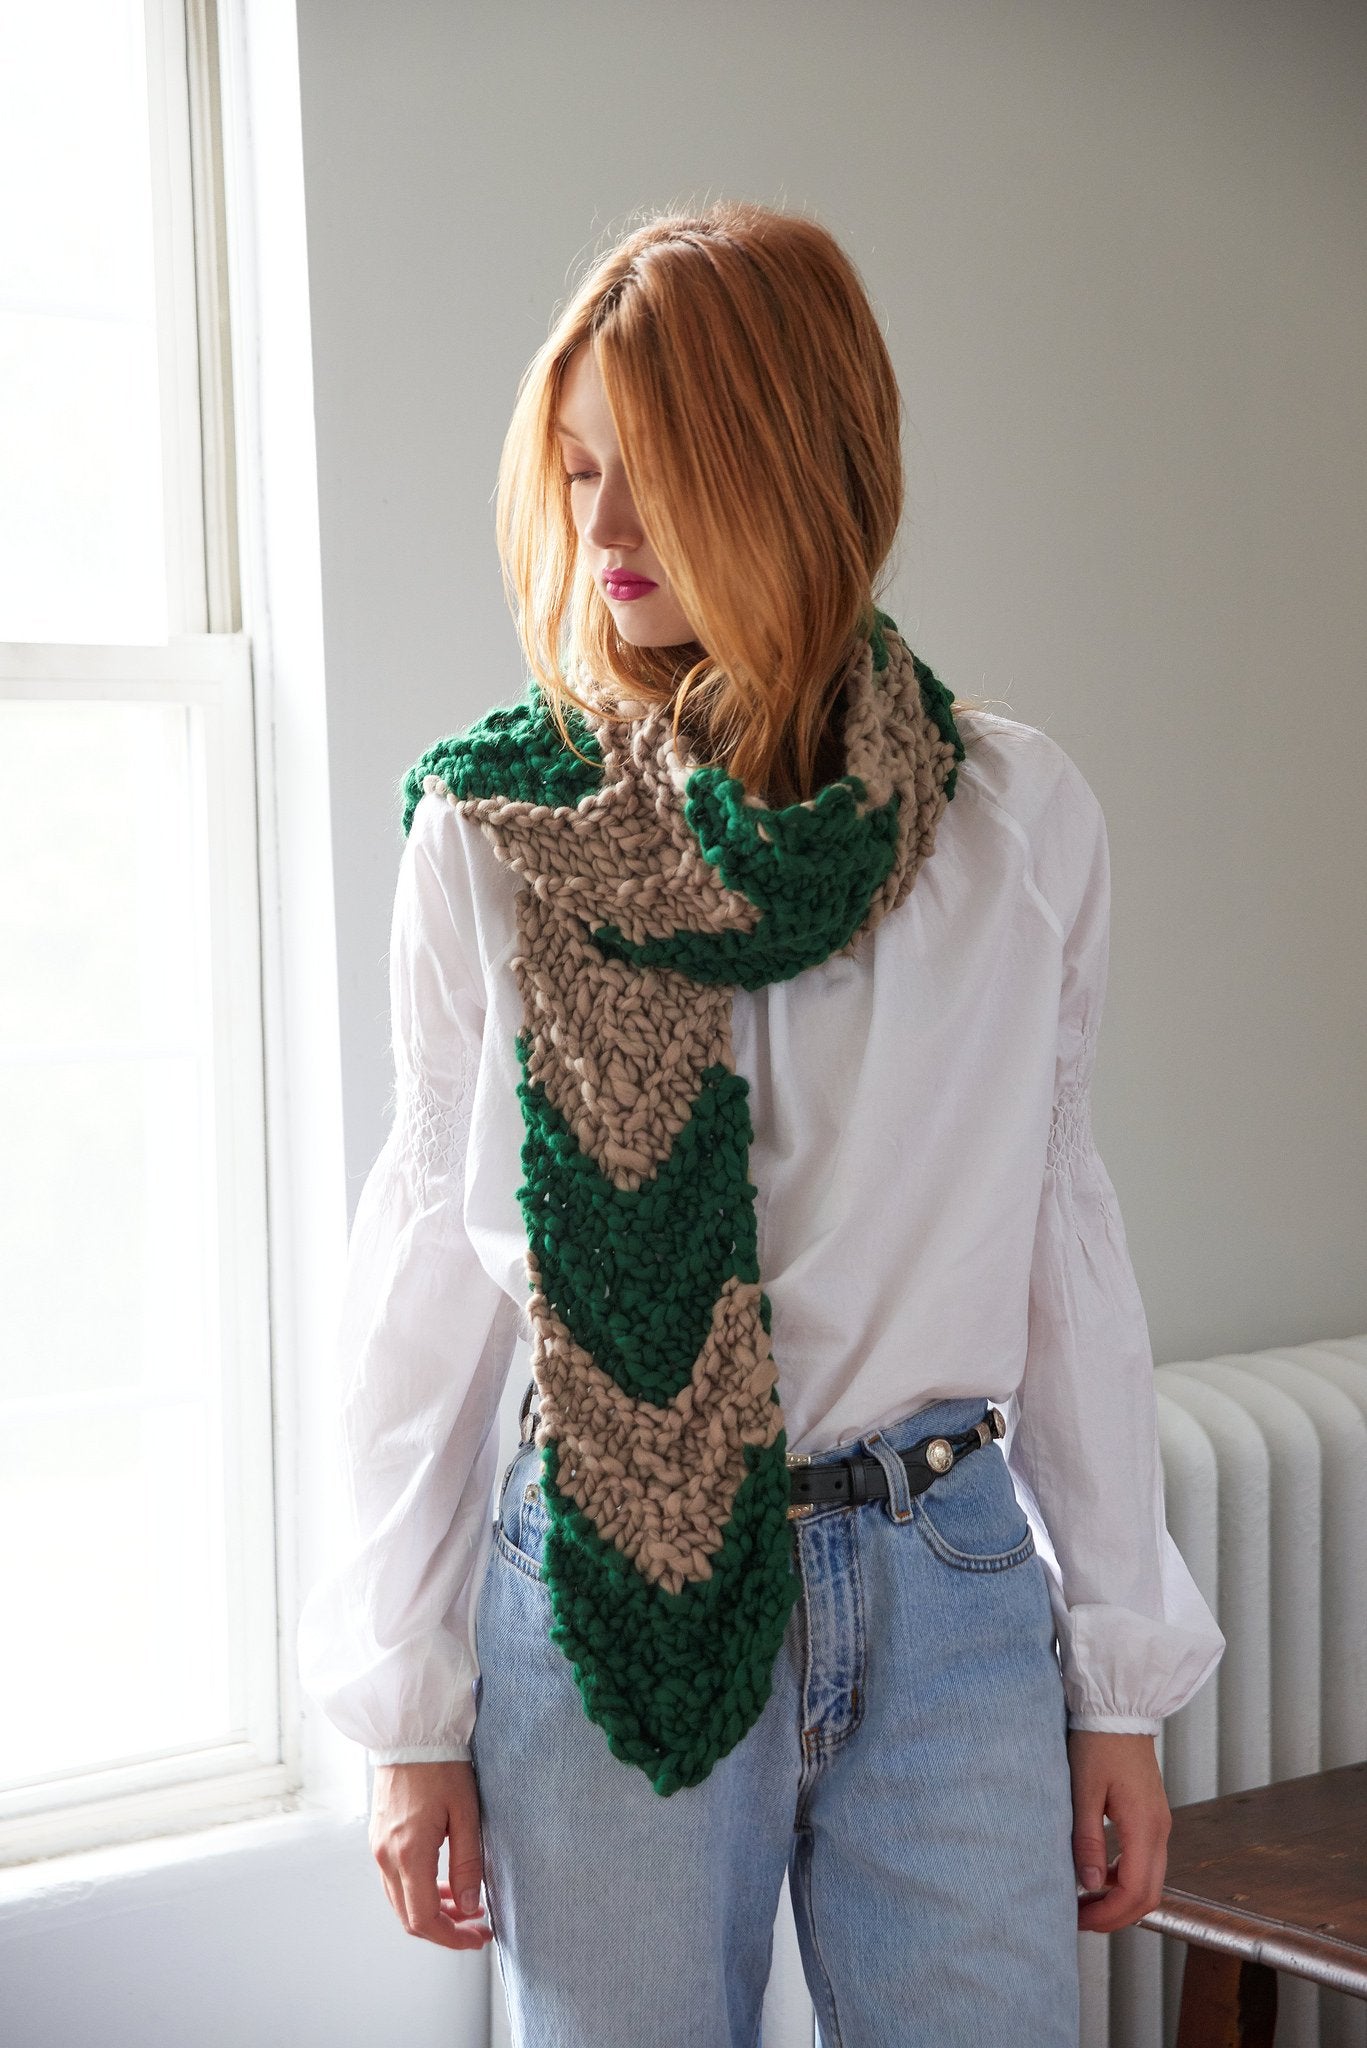 One Way or Another Chevron Scarf PATTERN - Merino No. 5